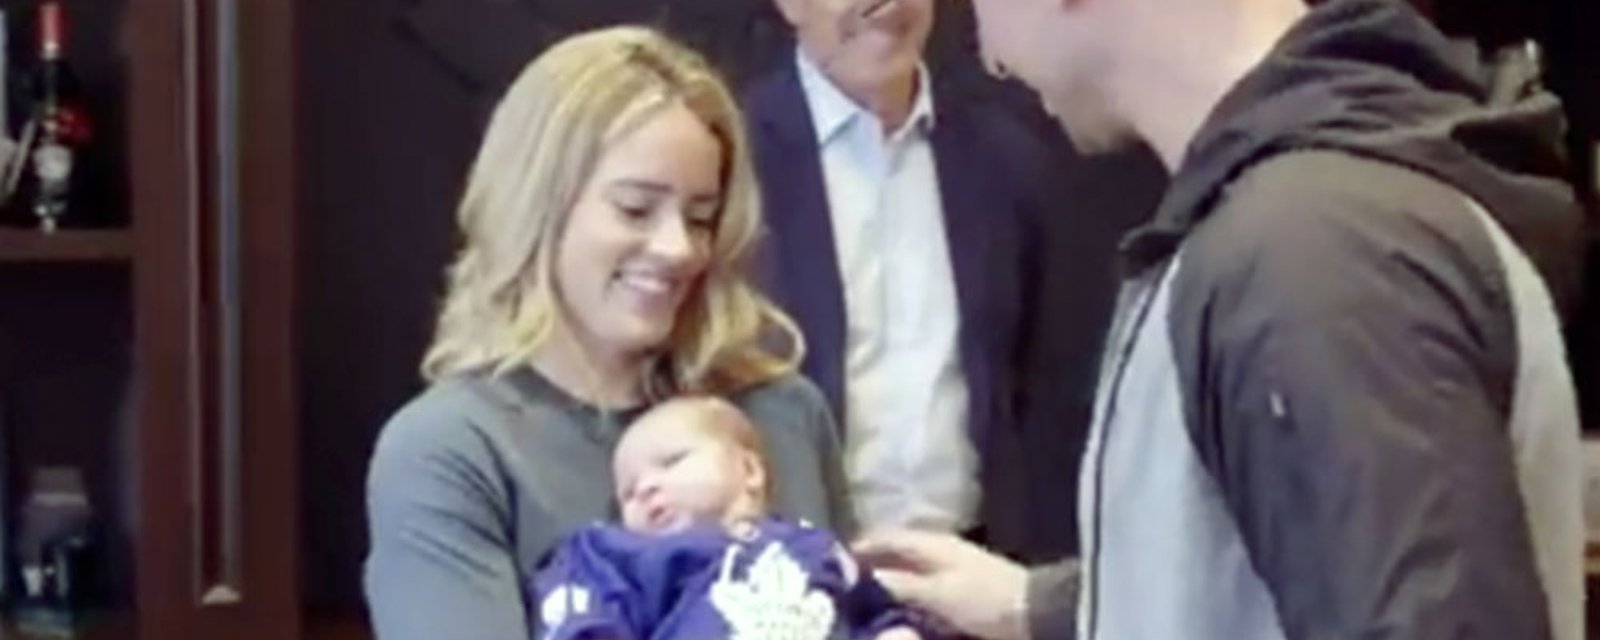 The incredible moment when John Tavares’ newborn son presented him with the Leafs’ captaincy